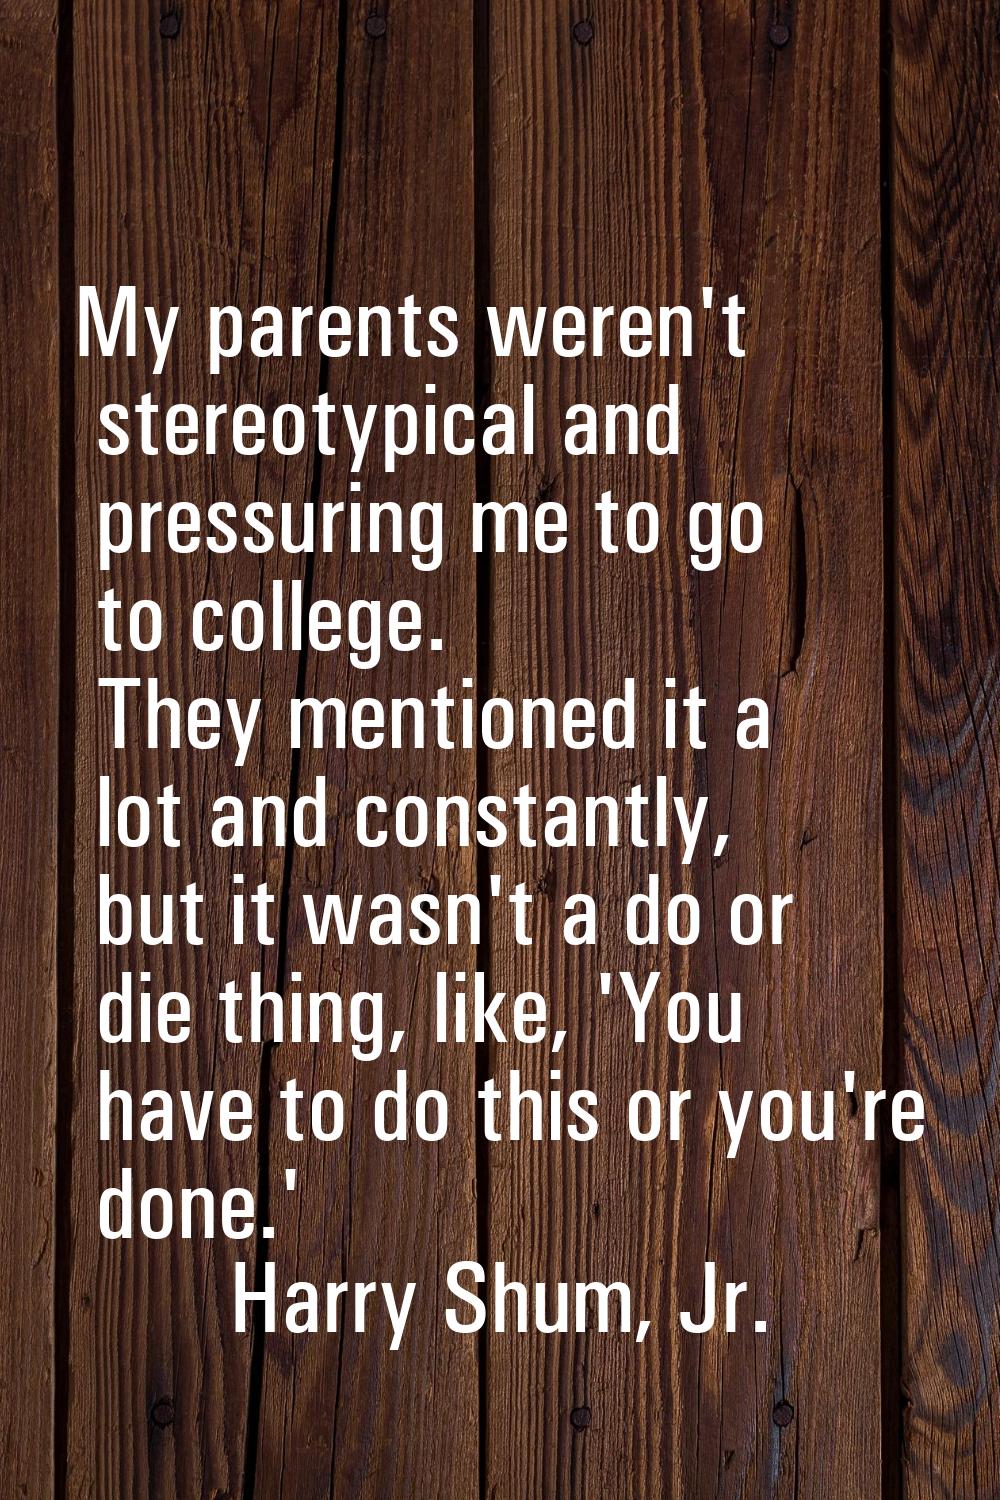 My parents weren't stereotypical and pressuring me to go to college. They mentioned it a lot and co